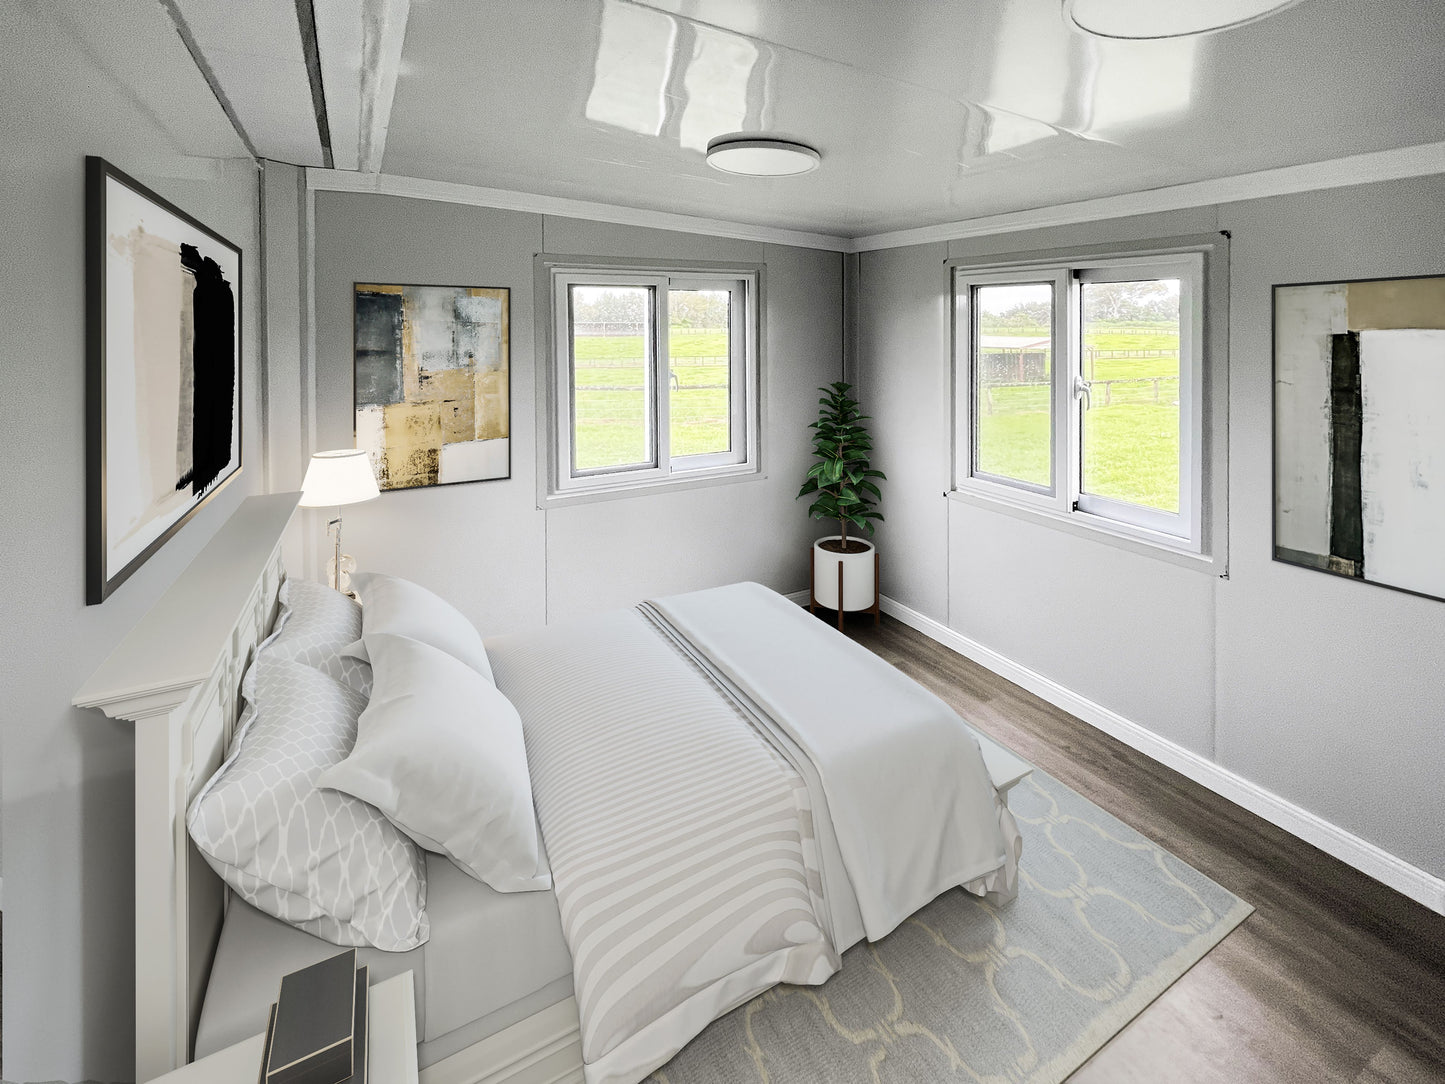 2 Bedroom Luxury Cabin Expandable Shipping Container Home $31,995